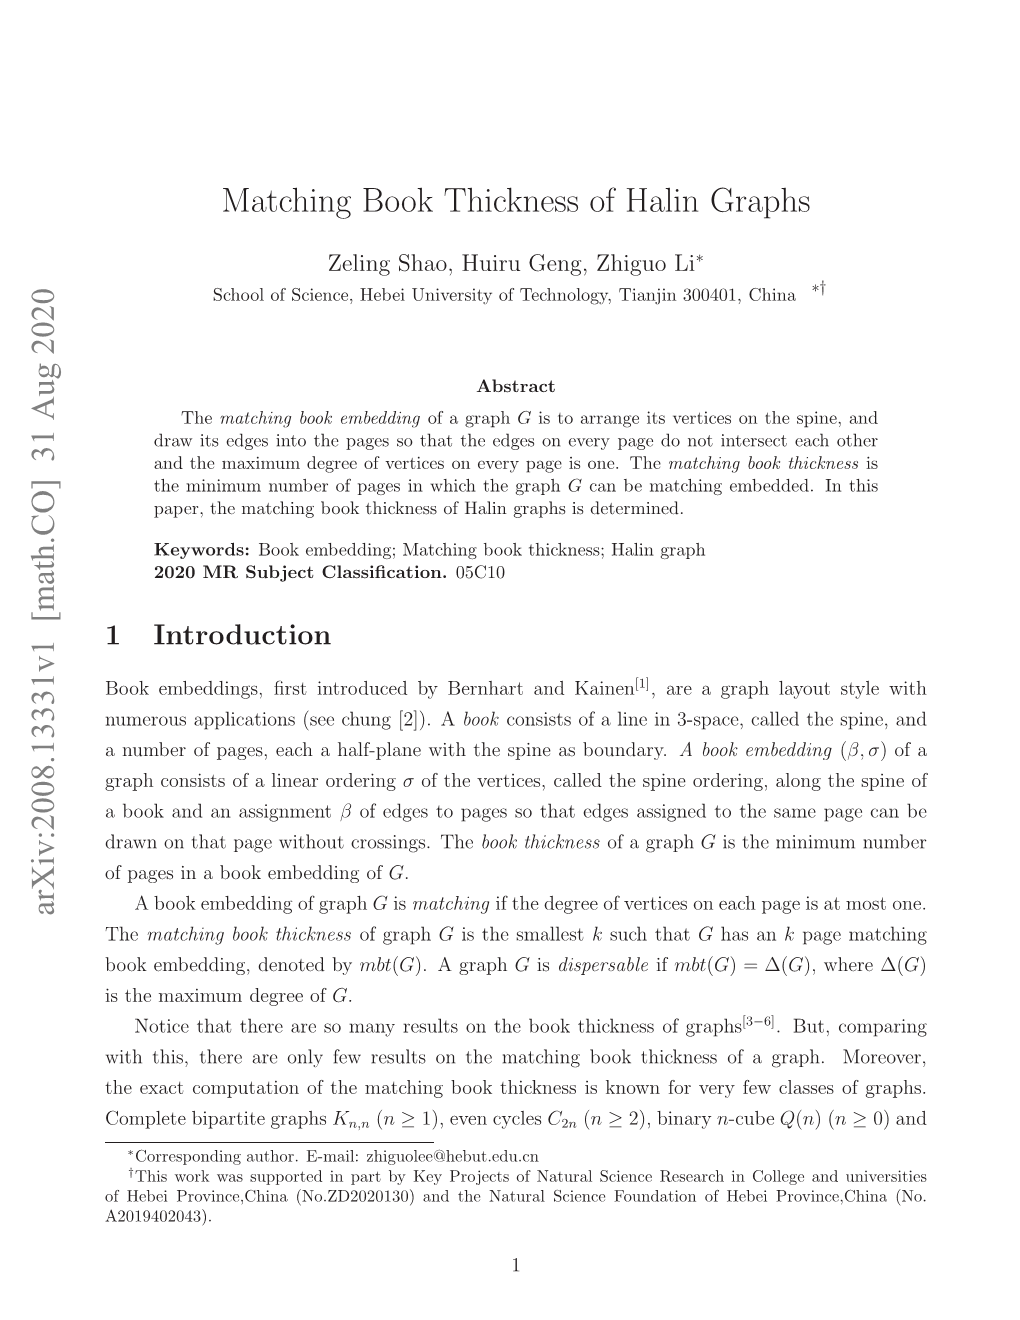 31 Aug 2020 Matching Book Thickness of Halin Graphs